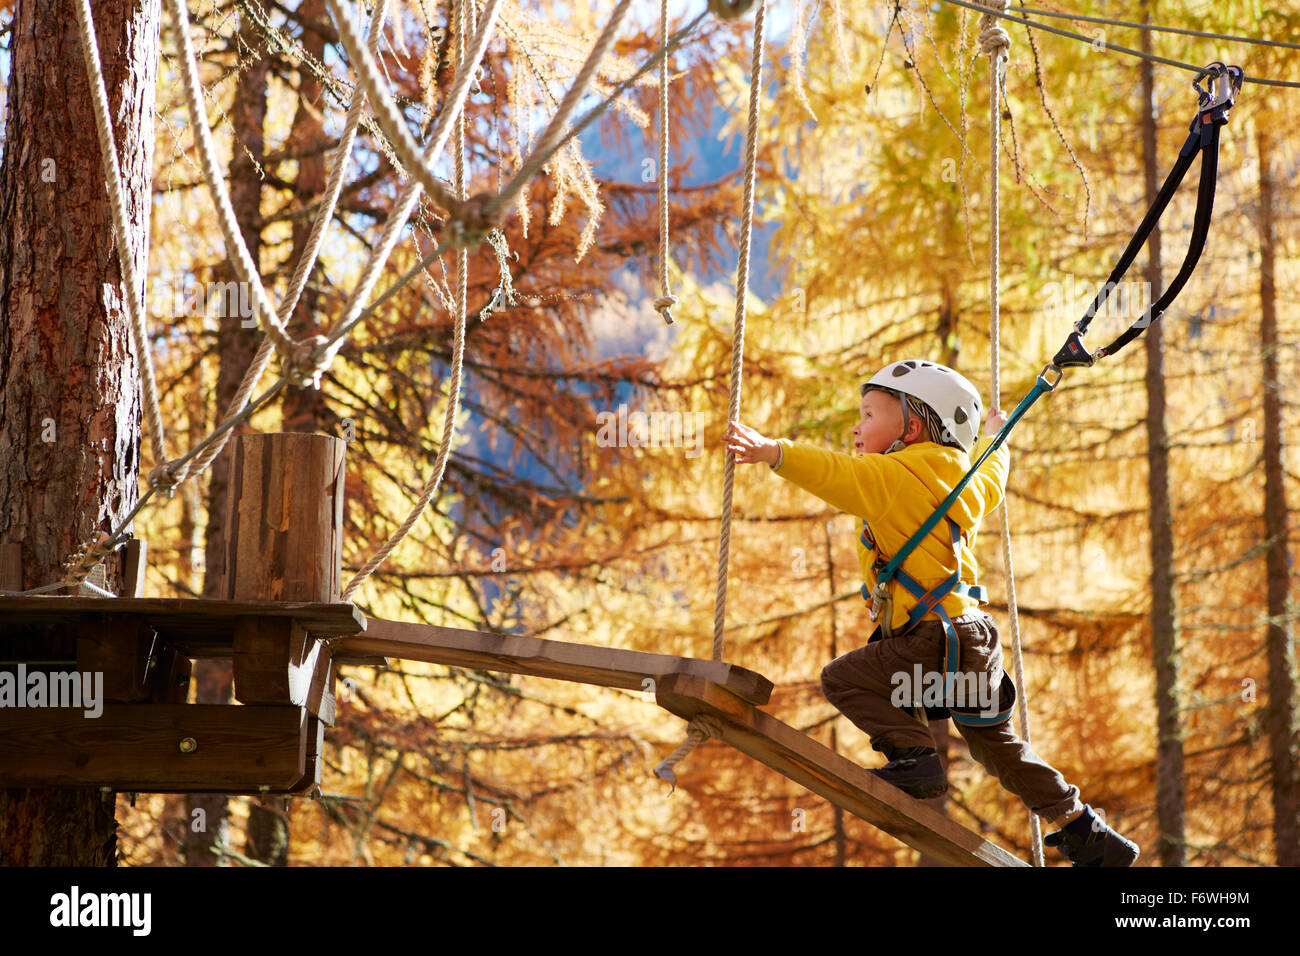 Boy in a high ropes course, Vernagt am See, Schnals Valley, South Tyrol, Italy Stock Photo